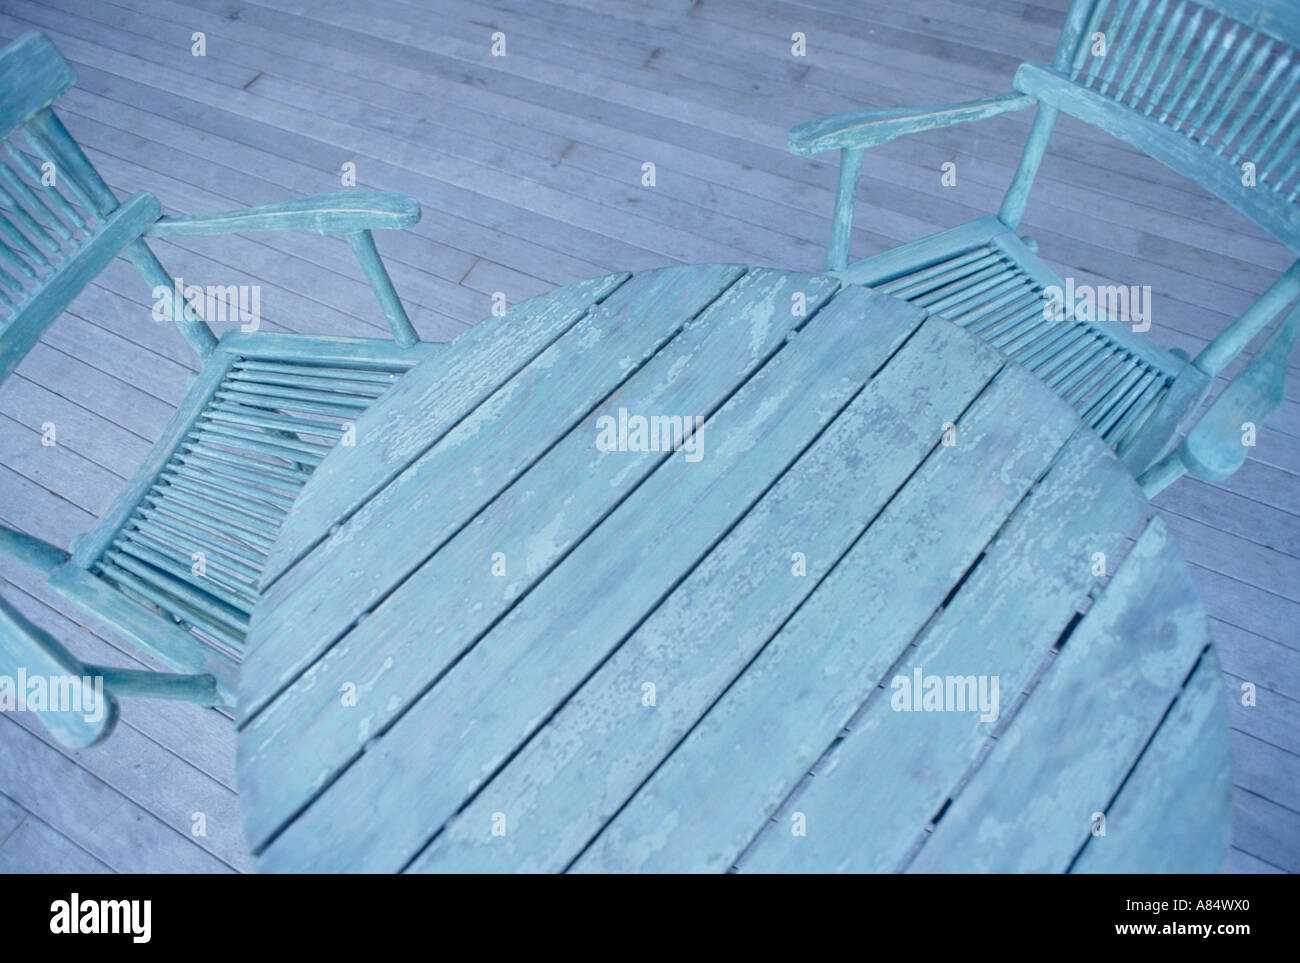 Still Life Of Painted Garden Table And Chairs On Decking Stock